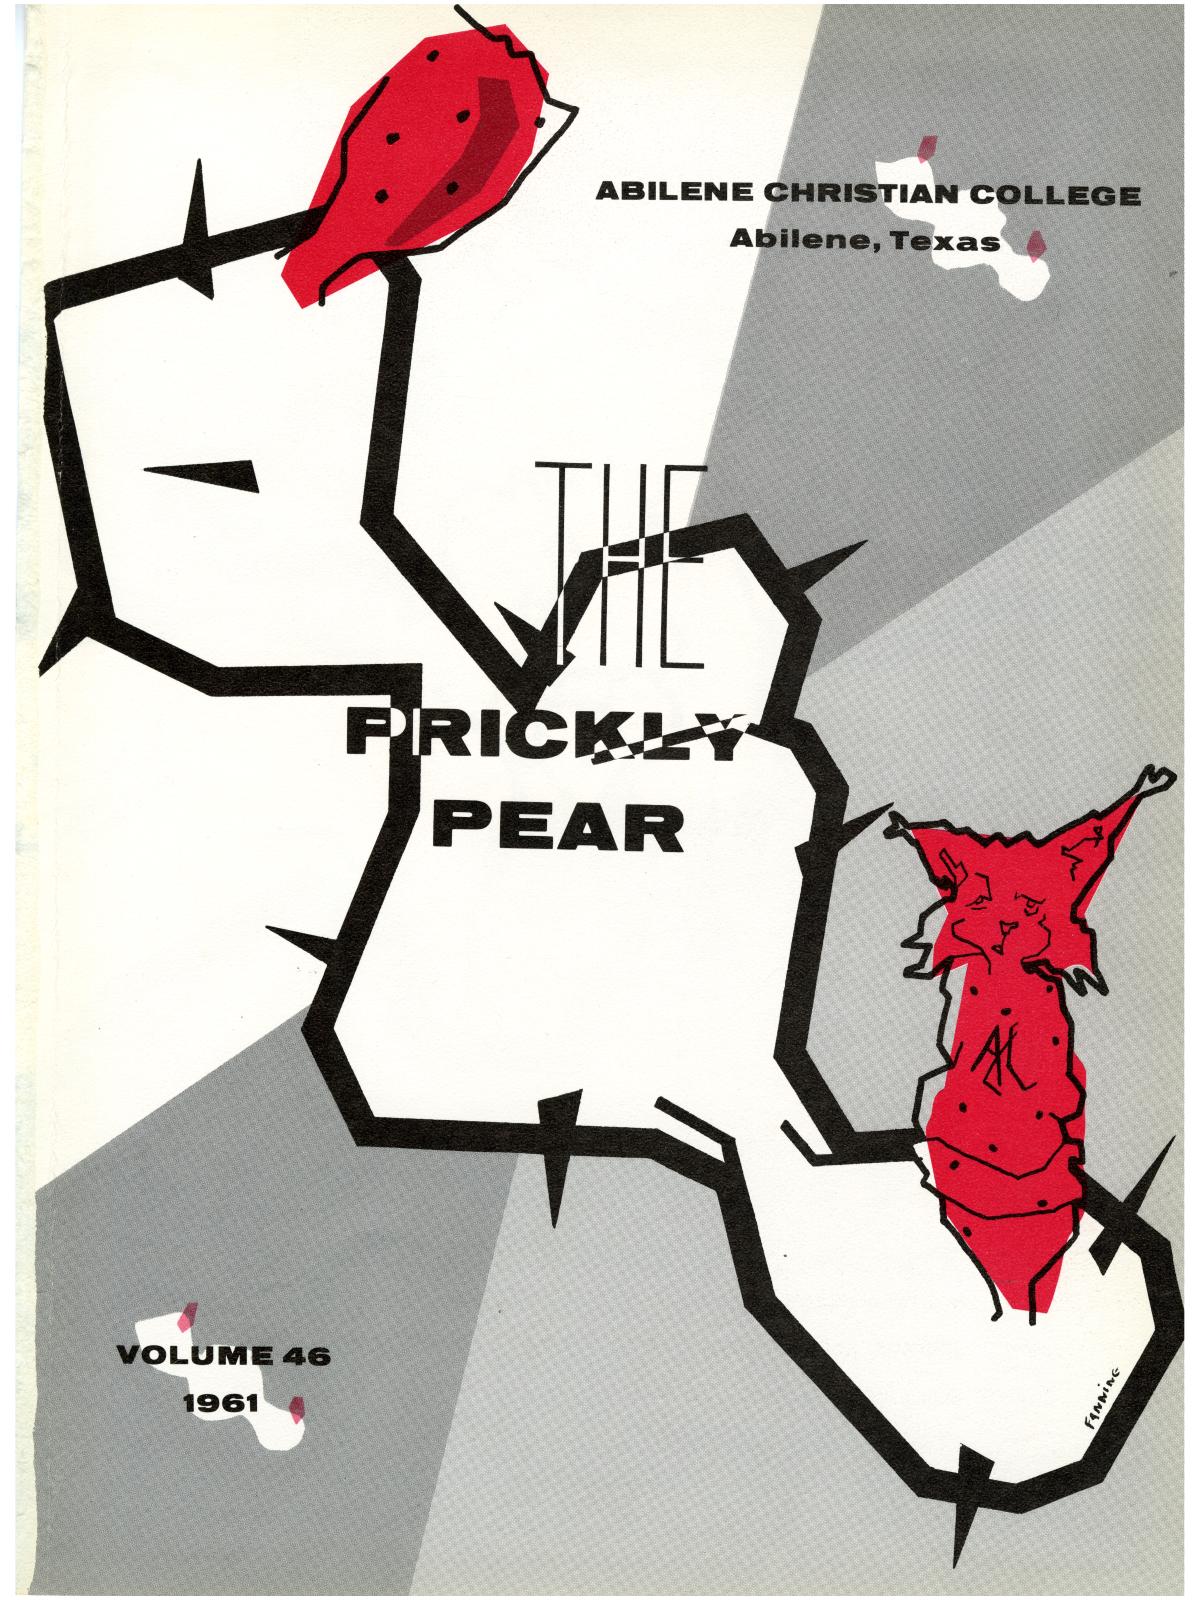 Prickly Pear, Yearbook of Abilene Christian College, 1961
                                                
                                                    1
                                                